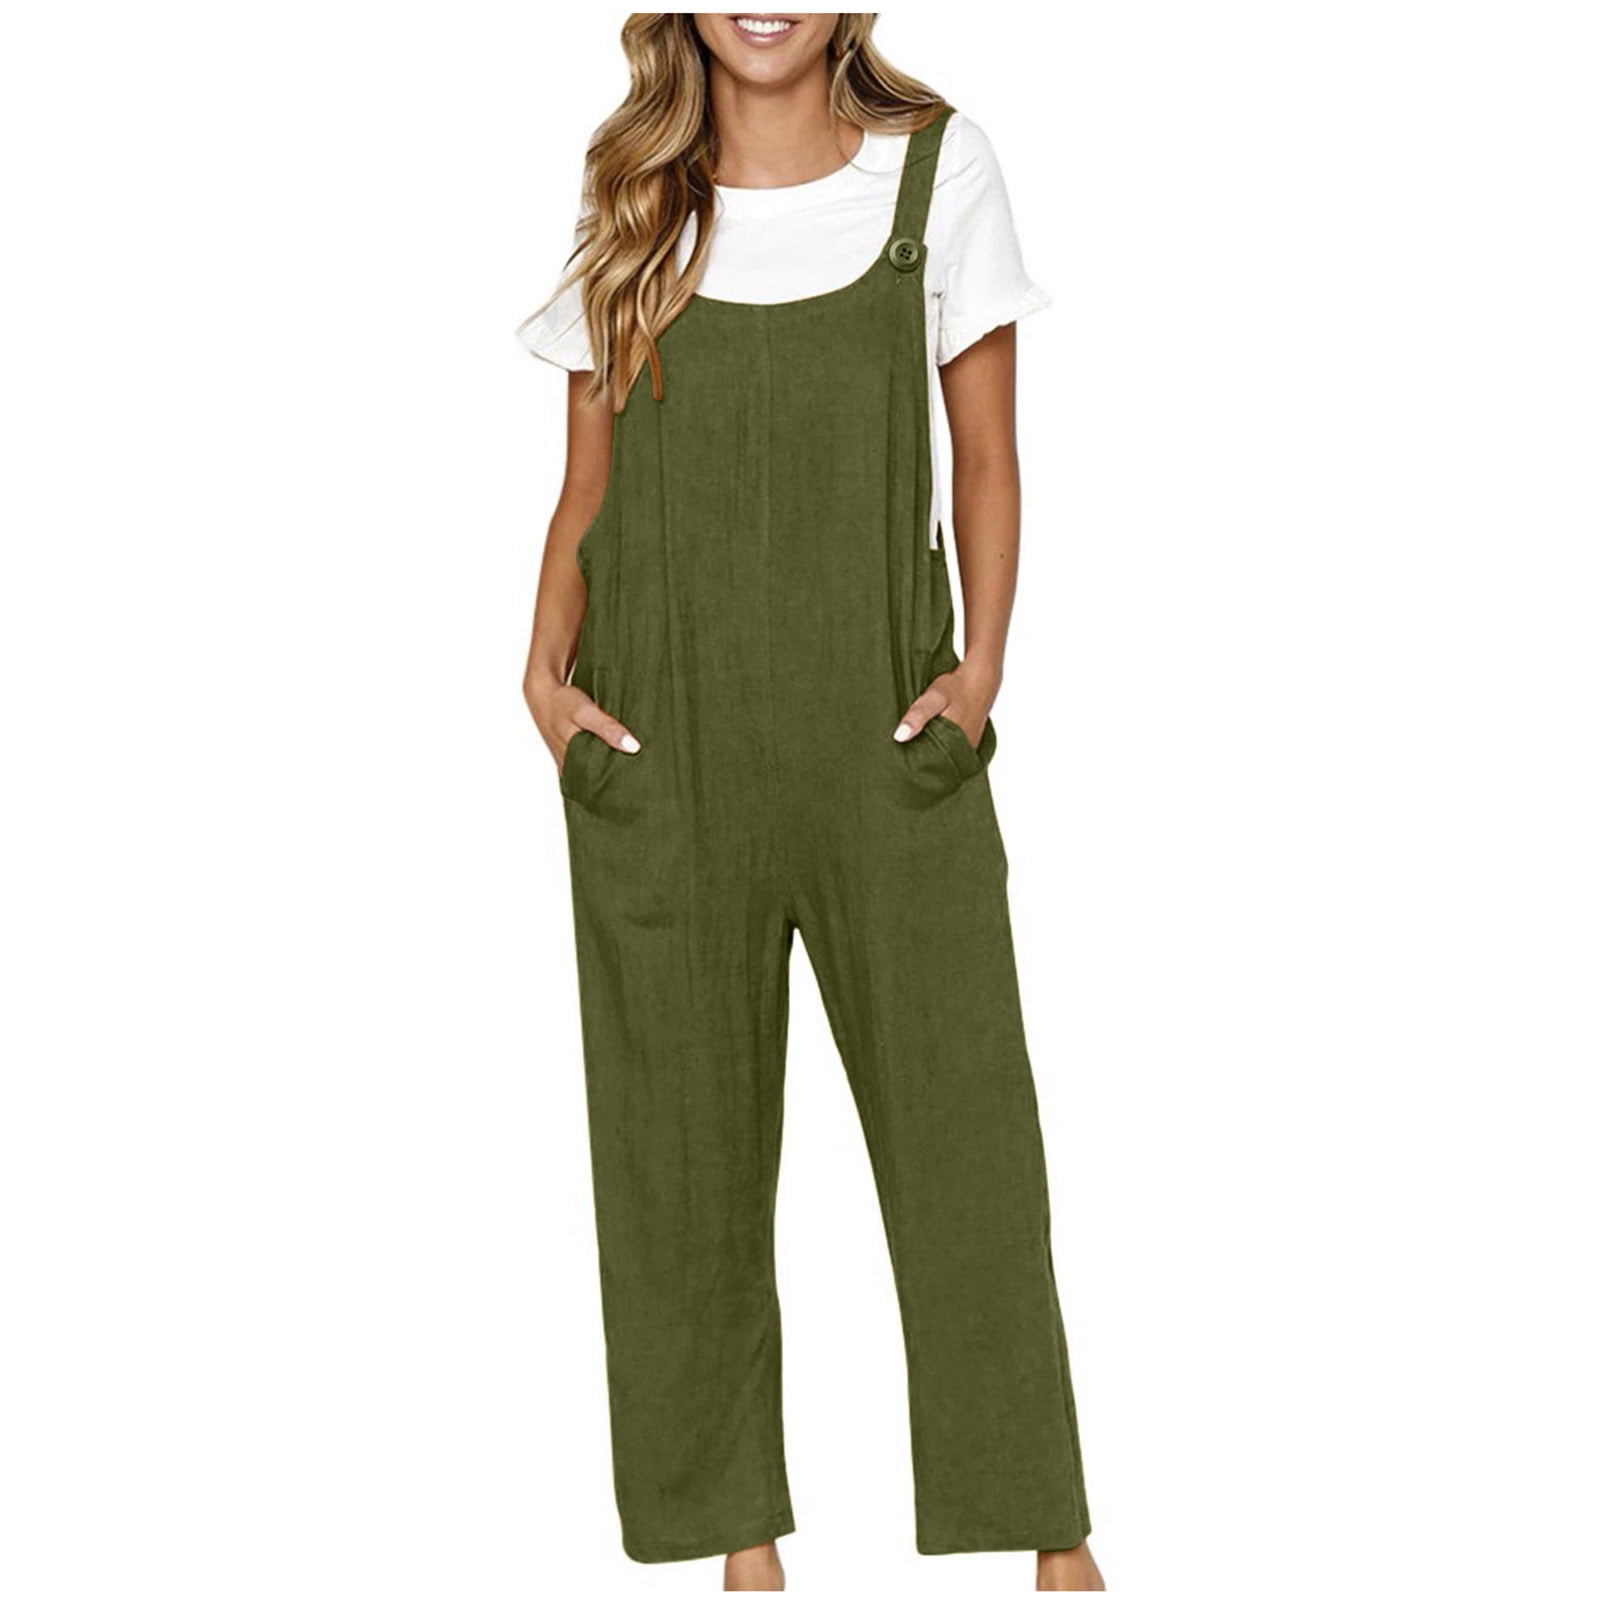 Oversized Jumpsuit Linen Overalls With Pockets Dungarees for Women